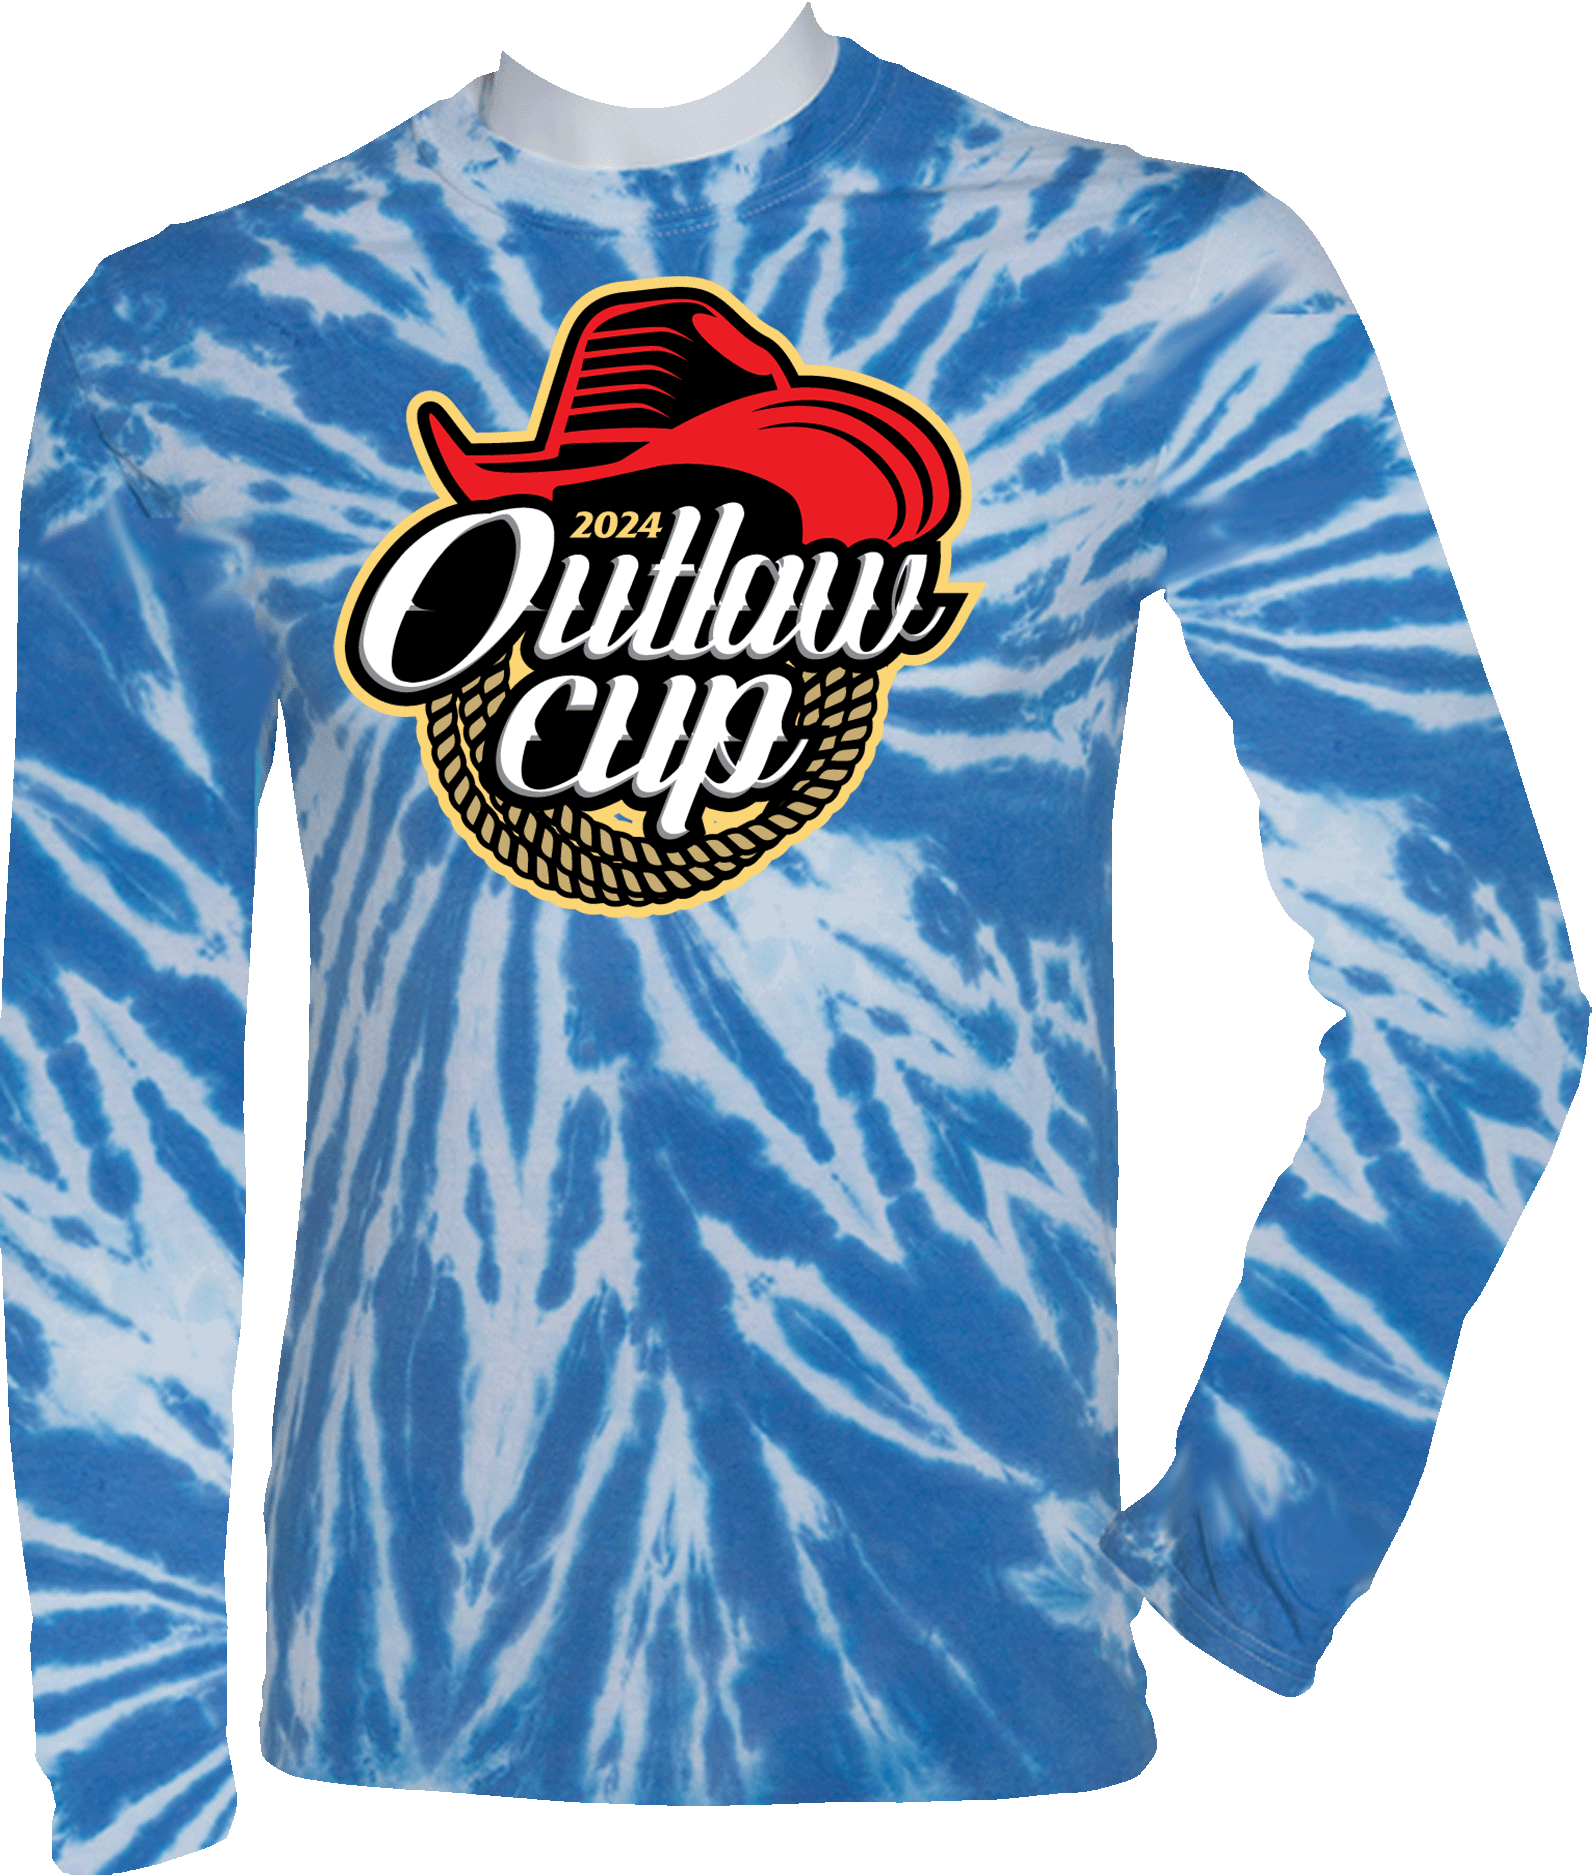 Tie-Dye Long Sleeves - 2024 Outlaw Cup